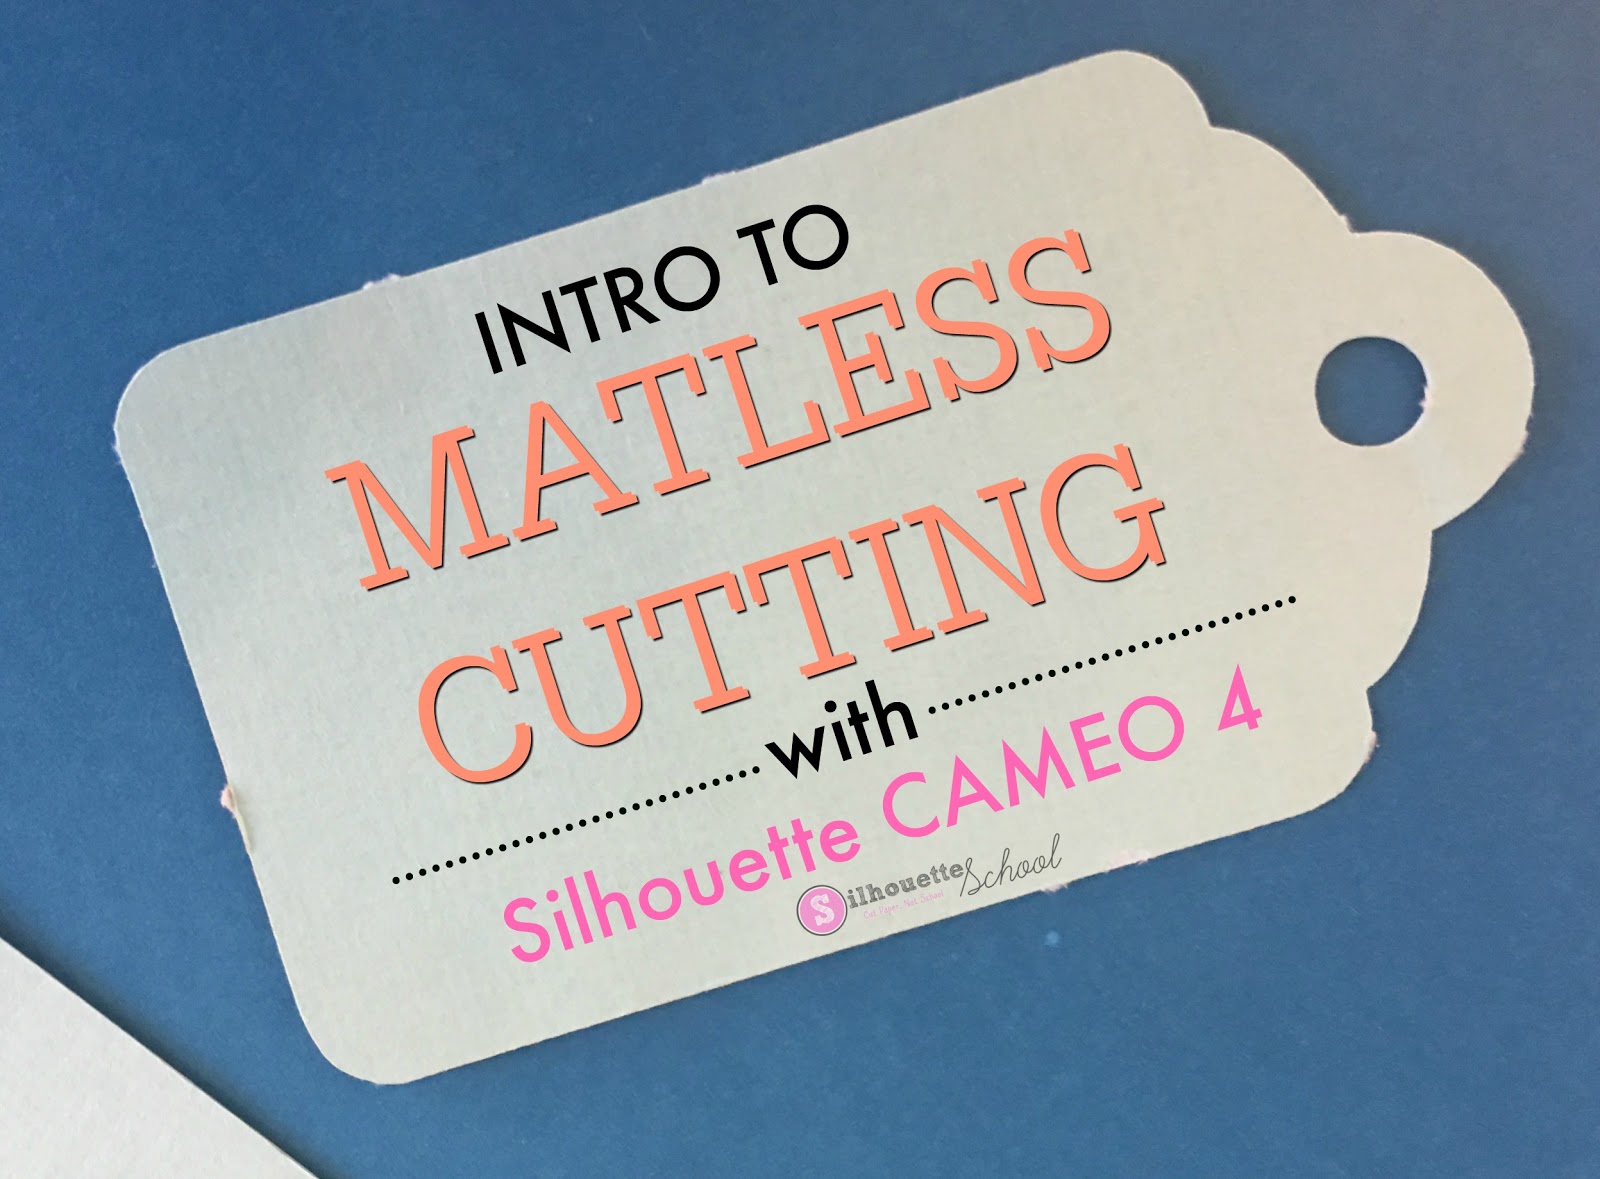 Silhouette CAMEO 4 Matless Cutting Tutorial (with Print and Cut option